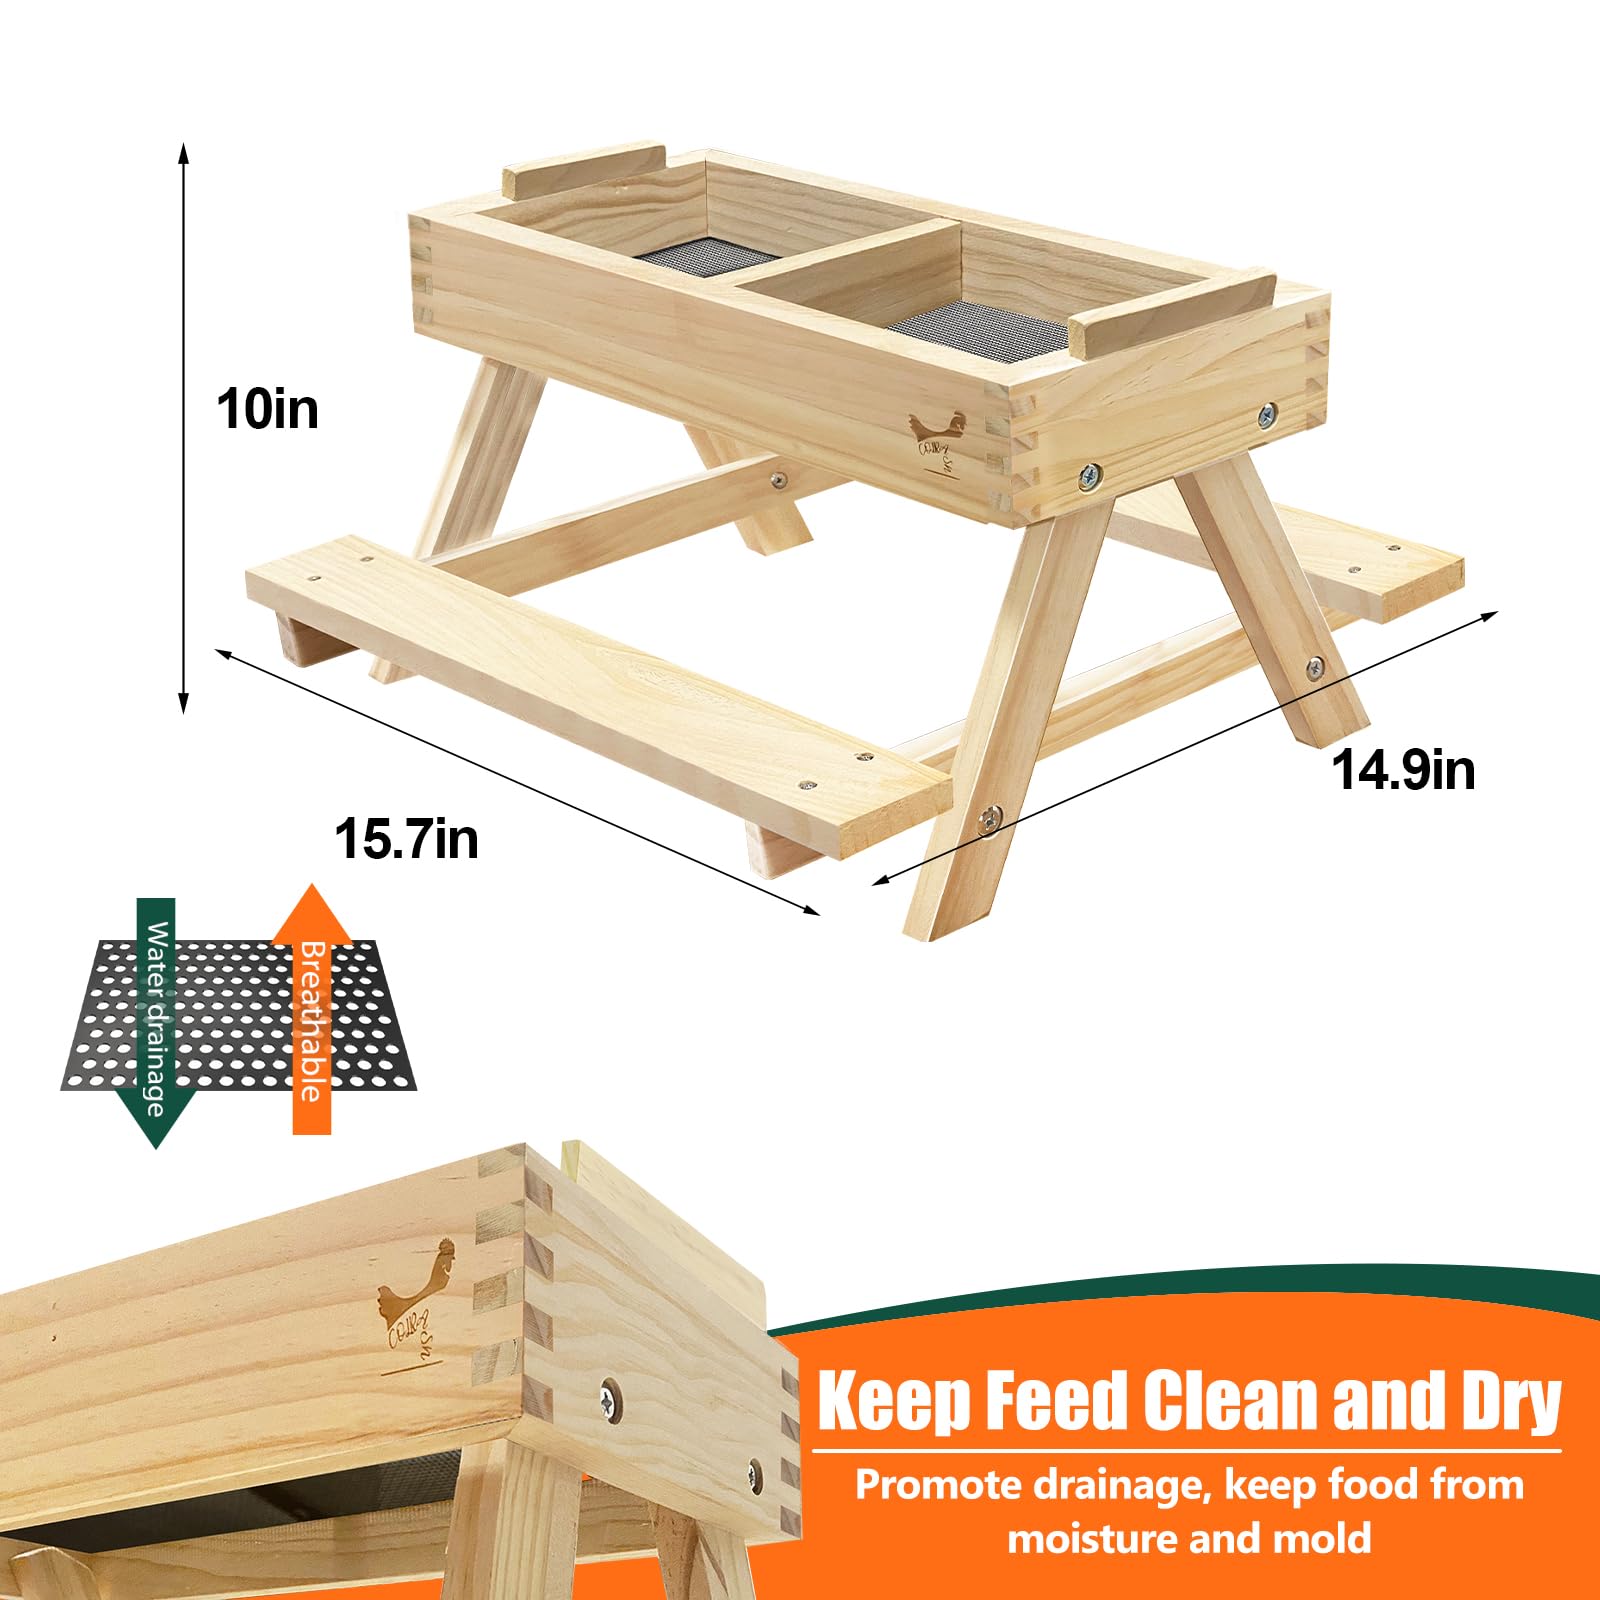 COLRASN Chicken Picnic Table,Chicken Feeder No Waste Handmade Wooden, DIY Chicken Feeder Kit, 15.7" L X 15" W X 10" H, Duck Feeder No Mess, Easy to Clean and Fill, Keep Food Fresh and Dry